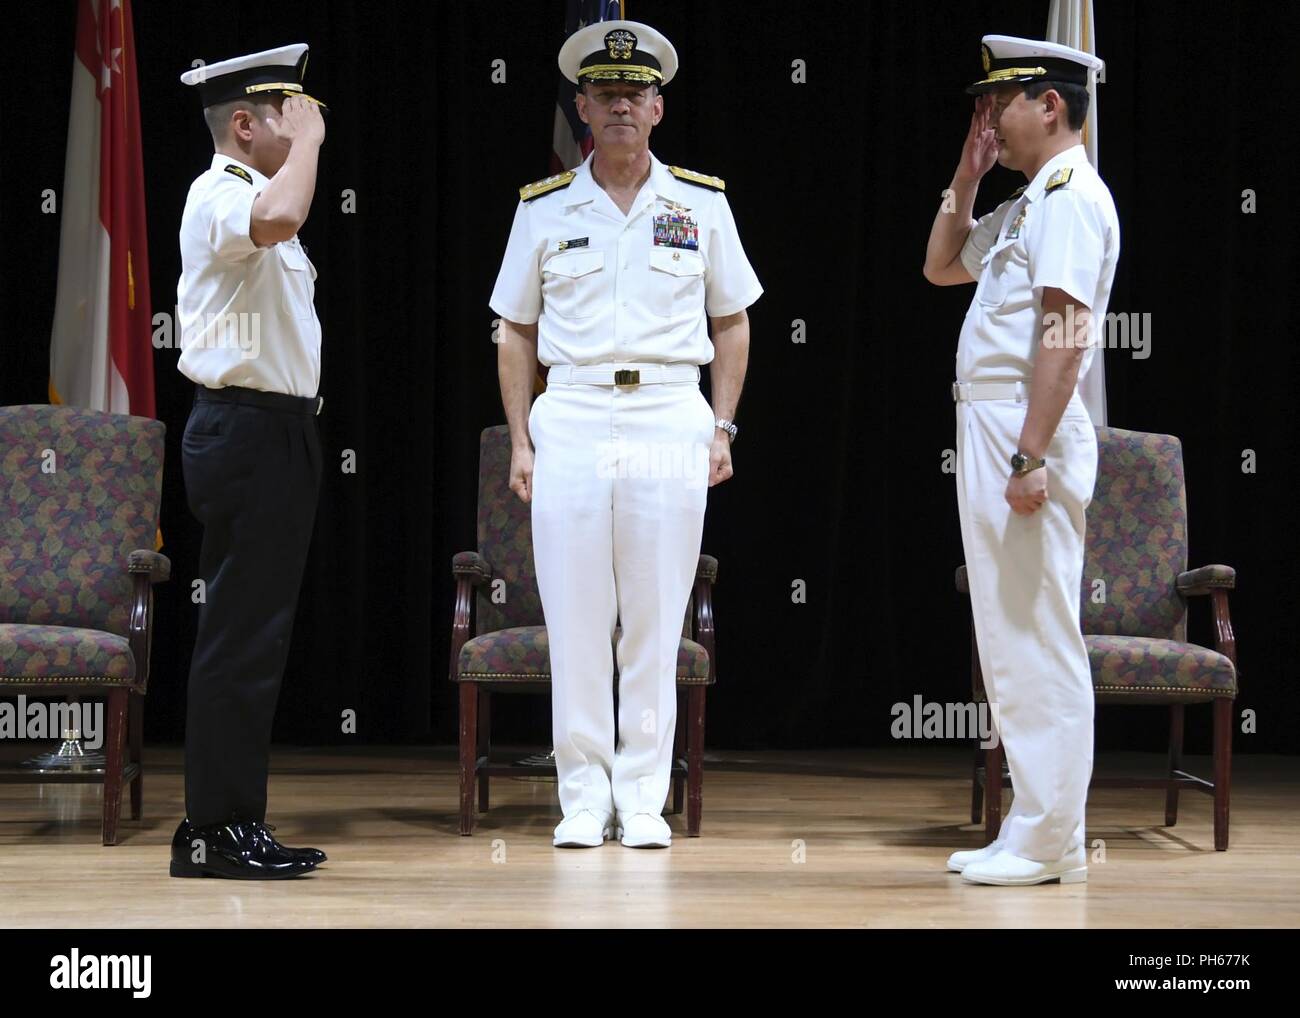 MANAMA, Bahrain (June 28, 2018) Vice Adm. Scott Stearney, middle, commander of U.S. Naval Forces Central Command, U.S. 5th Fleet and Combined Maritime Forces,  presides over a change of command between Republic of Singapore Navy Rear Adm. Saw Shi Tat, incoming commander of Combined Task Force (CTF) 151 left, and Japan Maritime Self-Defense Force Rear Adm. Daisuke Kajimoto, outgoing commander of Combined Task Force (CTF) 151 during the task force's change of command ceremony on Naval Support Activity Bahrain. CTF 151's mission is to disrupt piracy at sea and to engage with regional and other pa Stock Photo